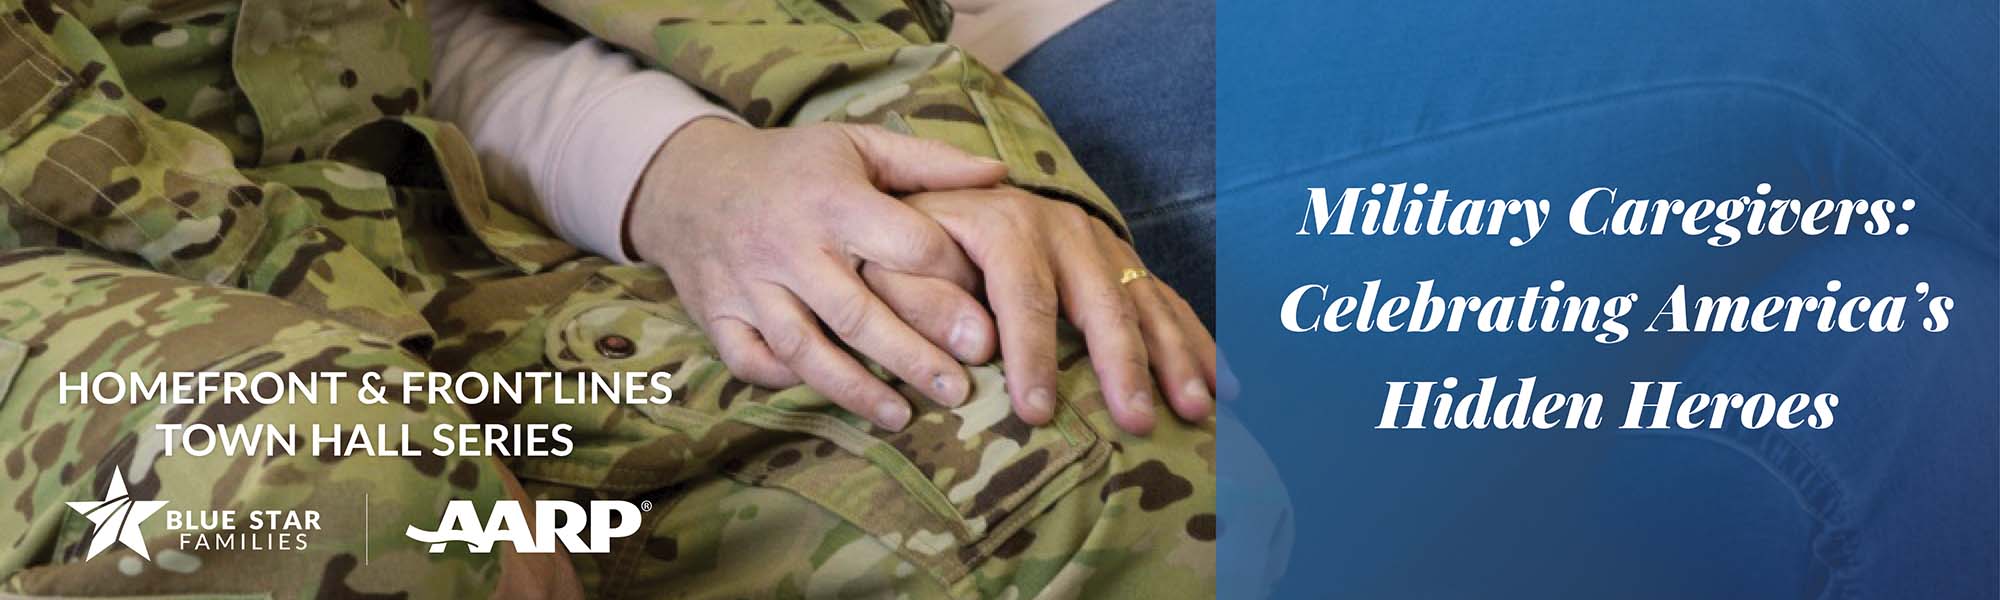 Military Caregivers Town Hall image